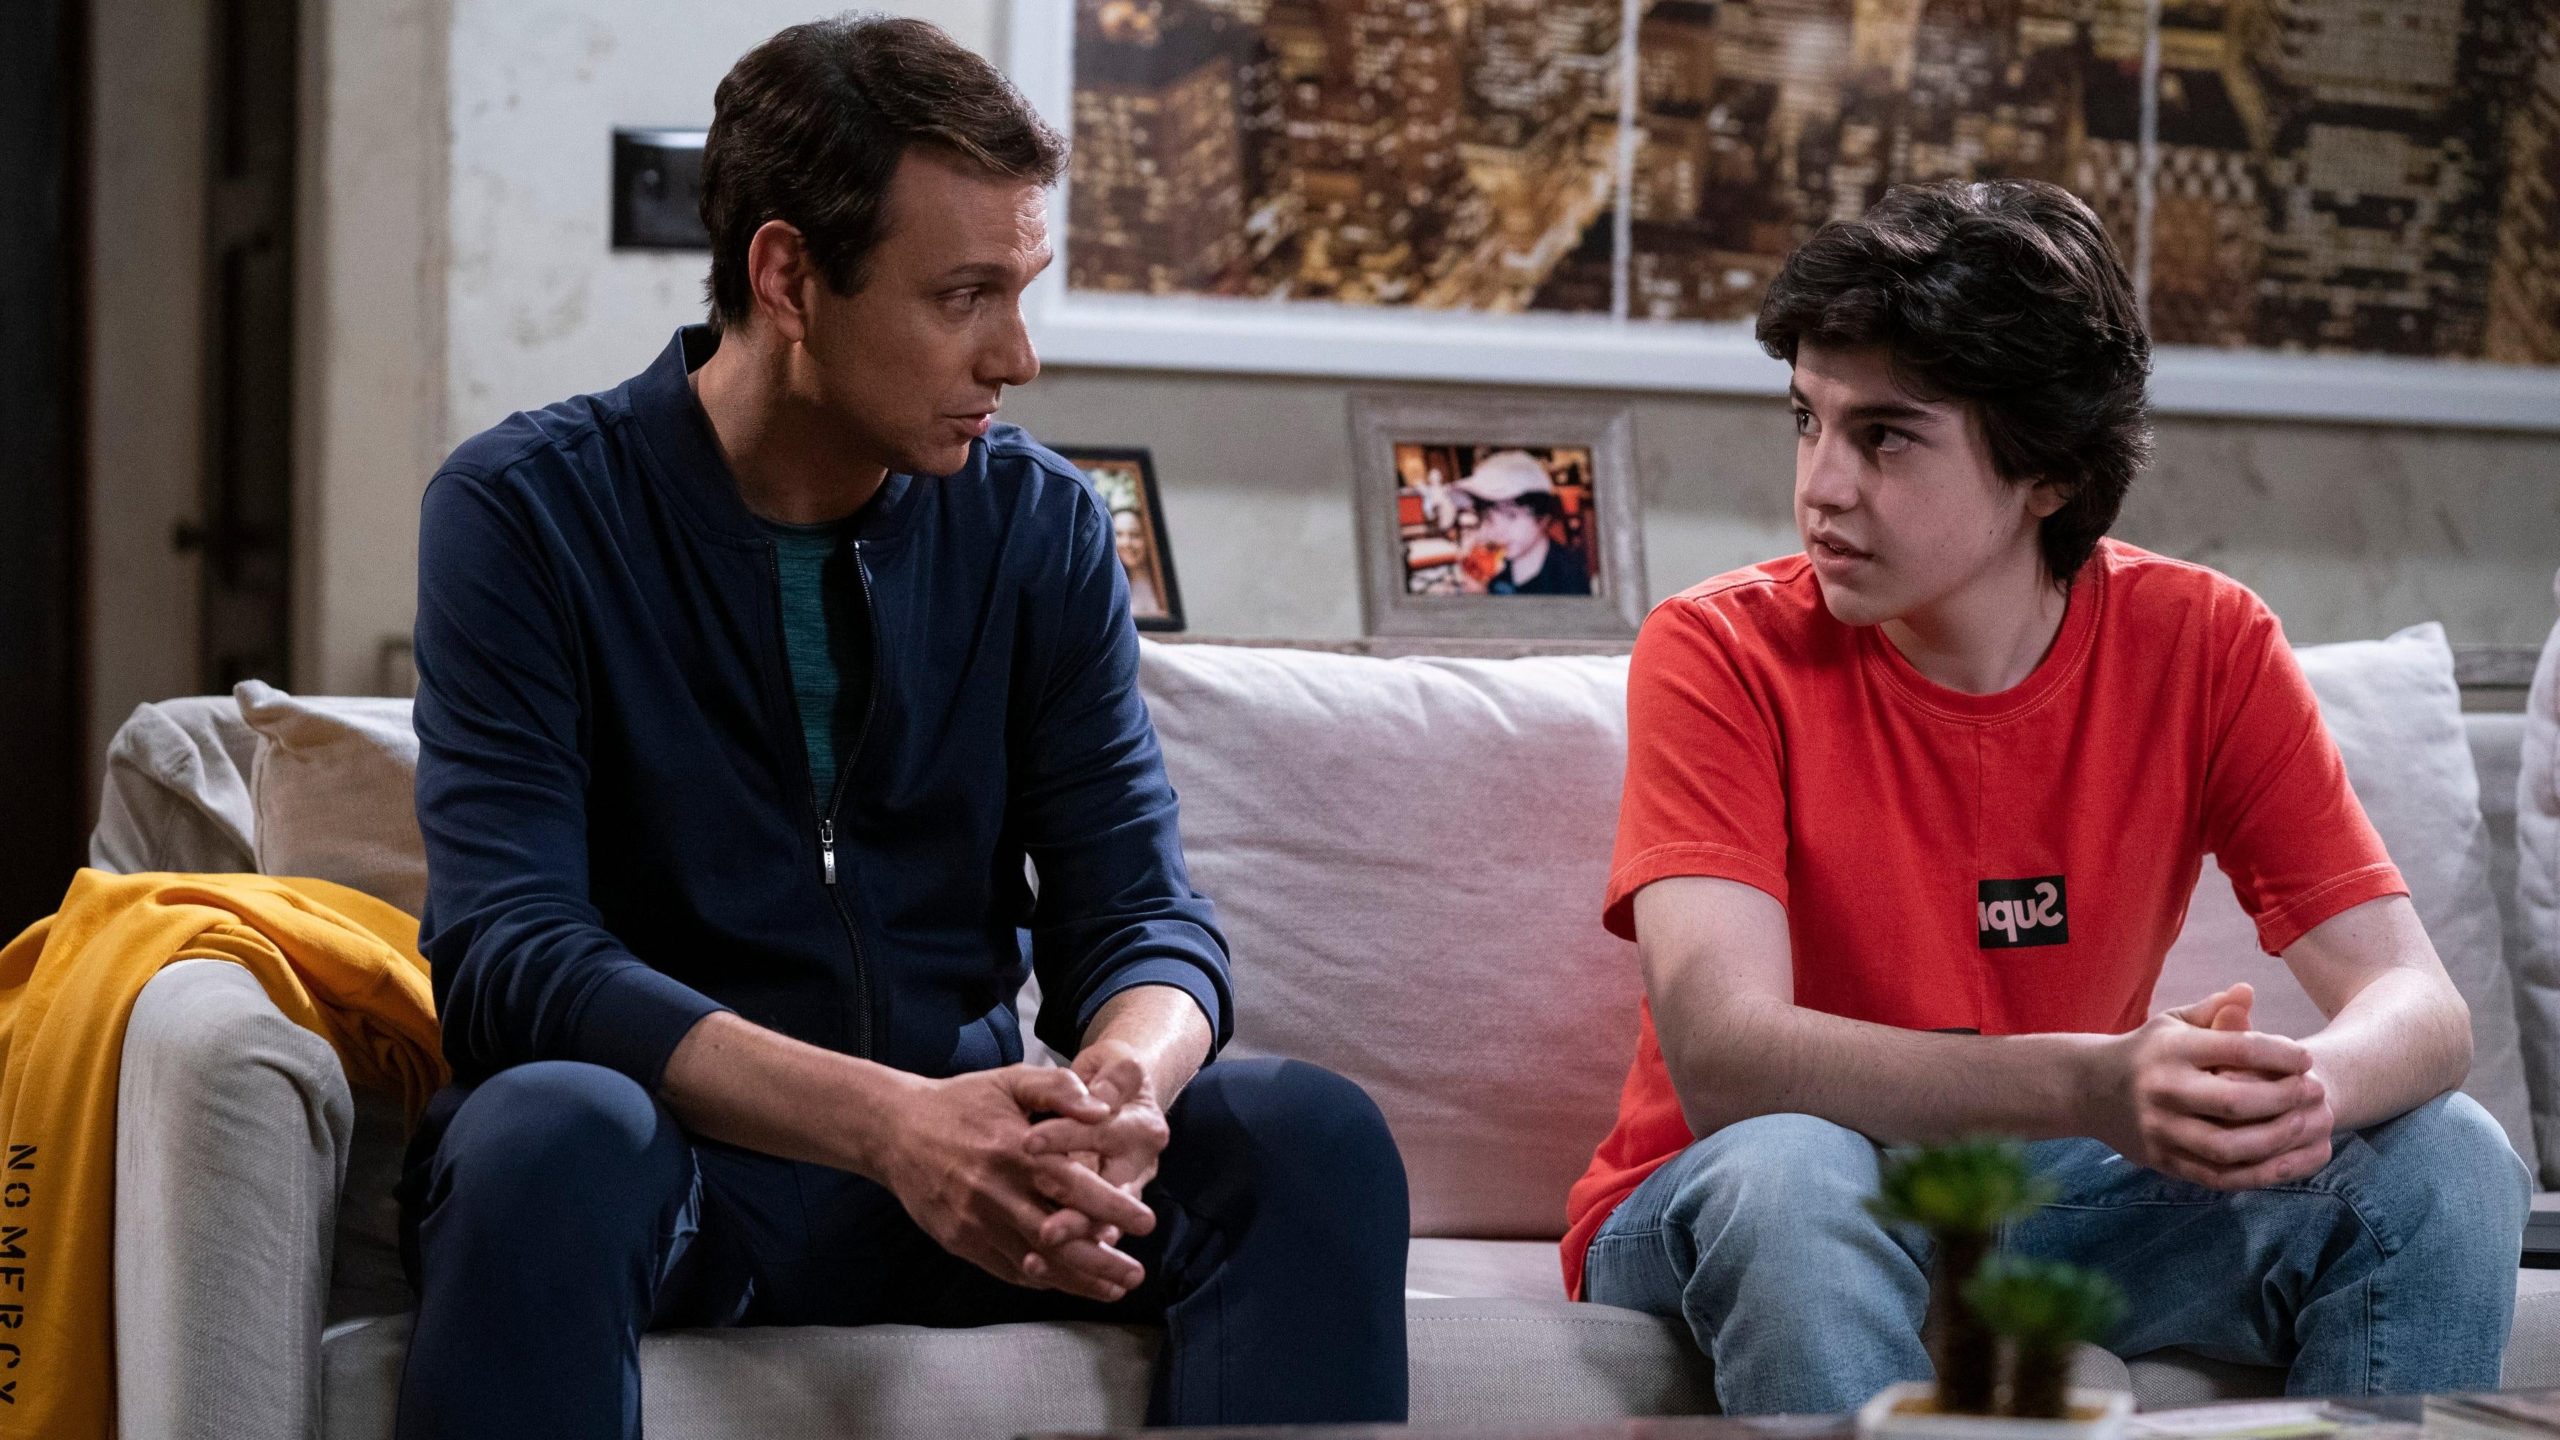 Daniel's son Anthony, right, is Kenny's main rival. (Image: Netflix)